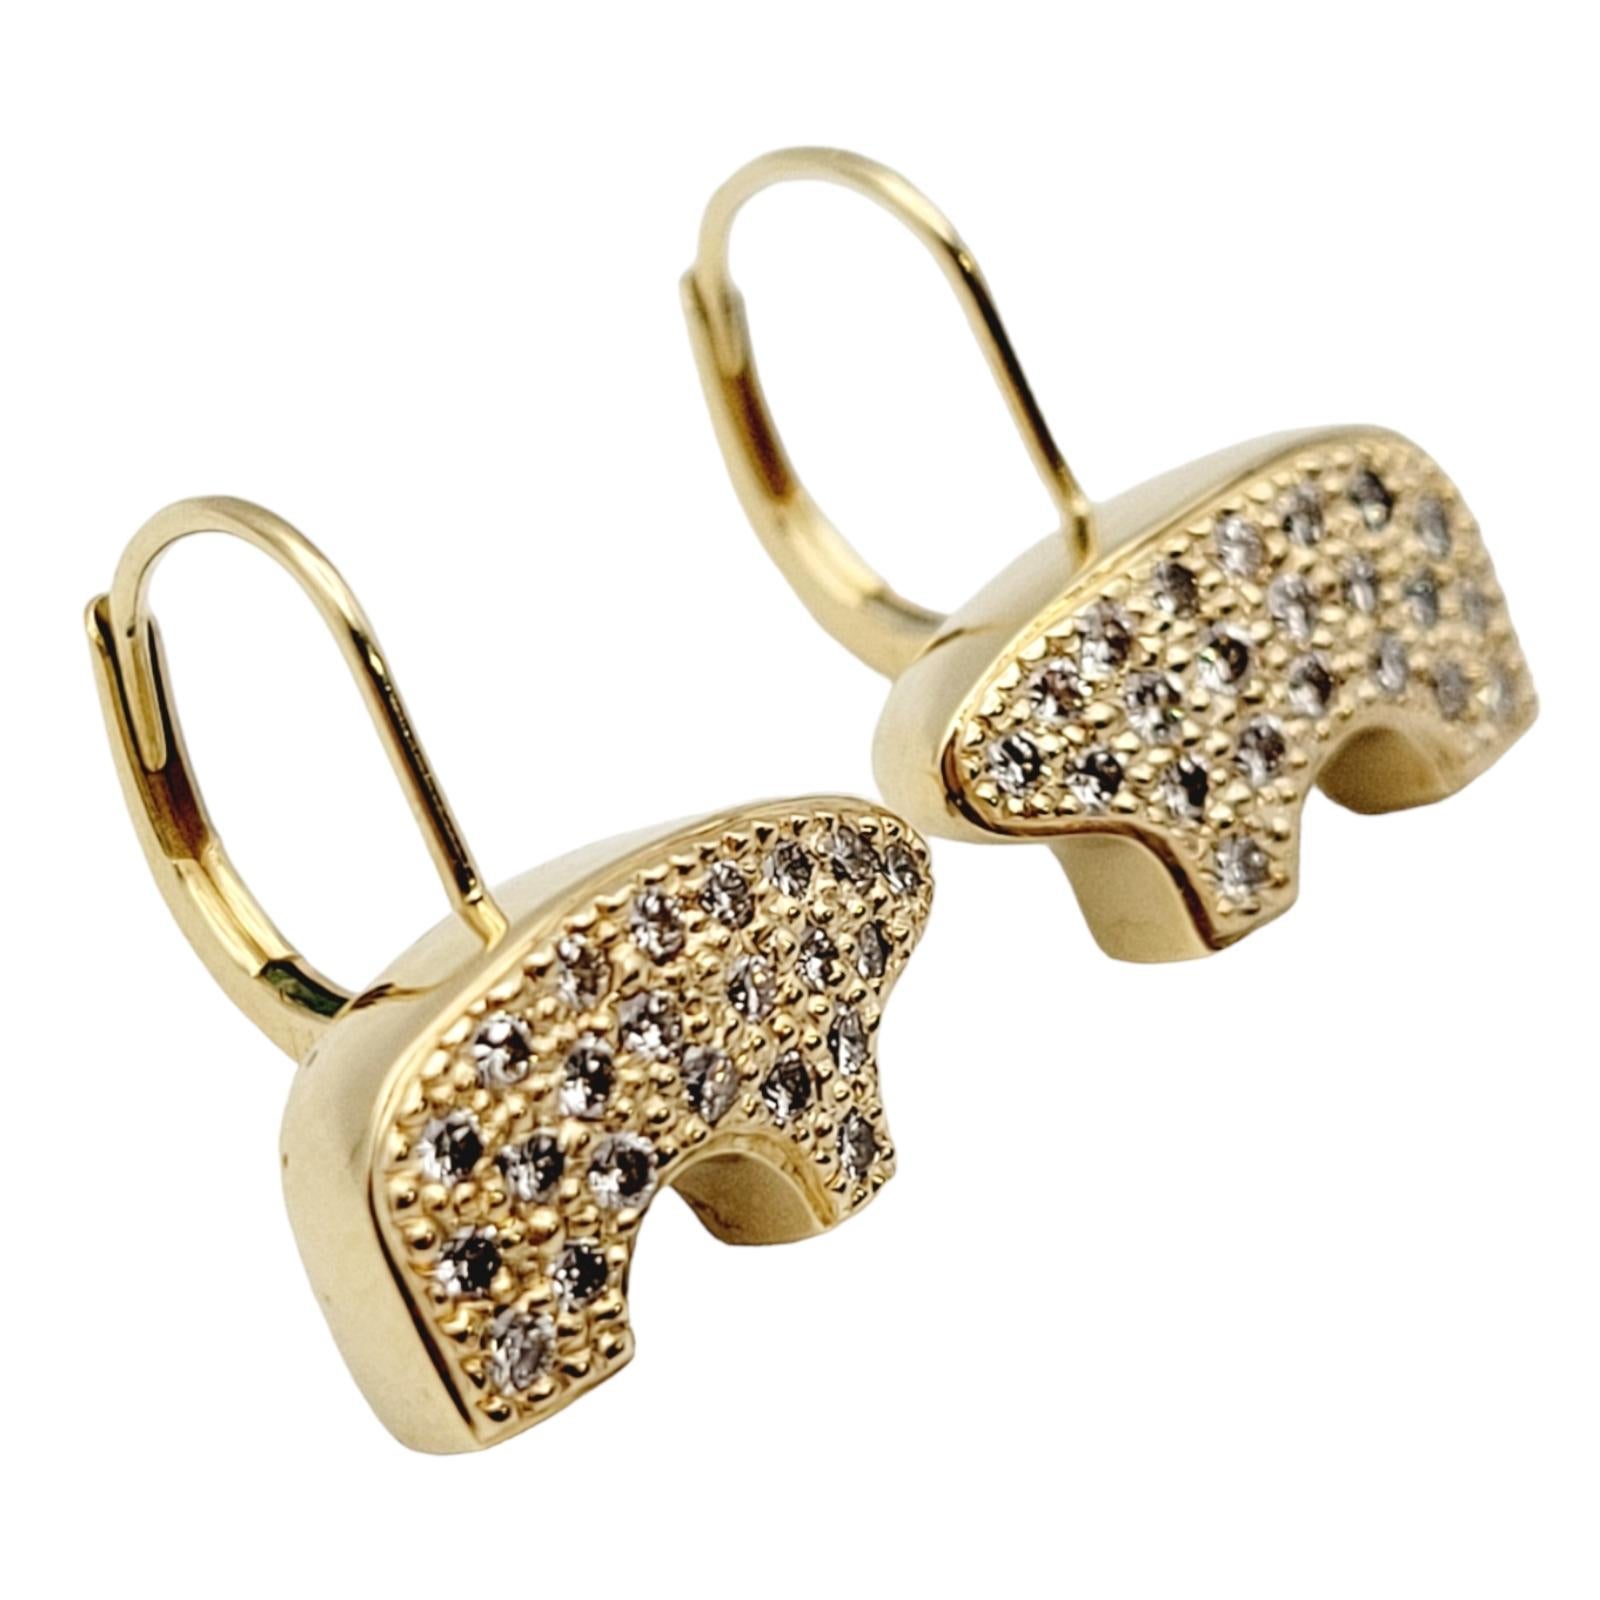 This beautiful pair of lever-back earrings were designed by The Golden Bear. Founded in Vail, Colorado, in 1975, the Golden Bear store's distinctive little bruin would become recognized as 